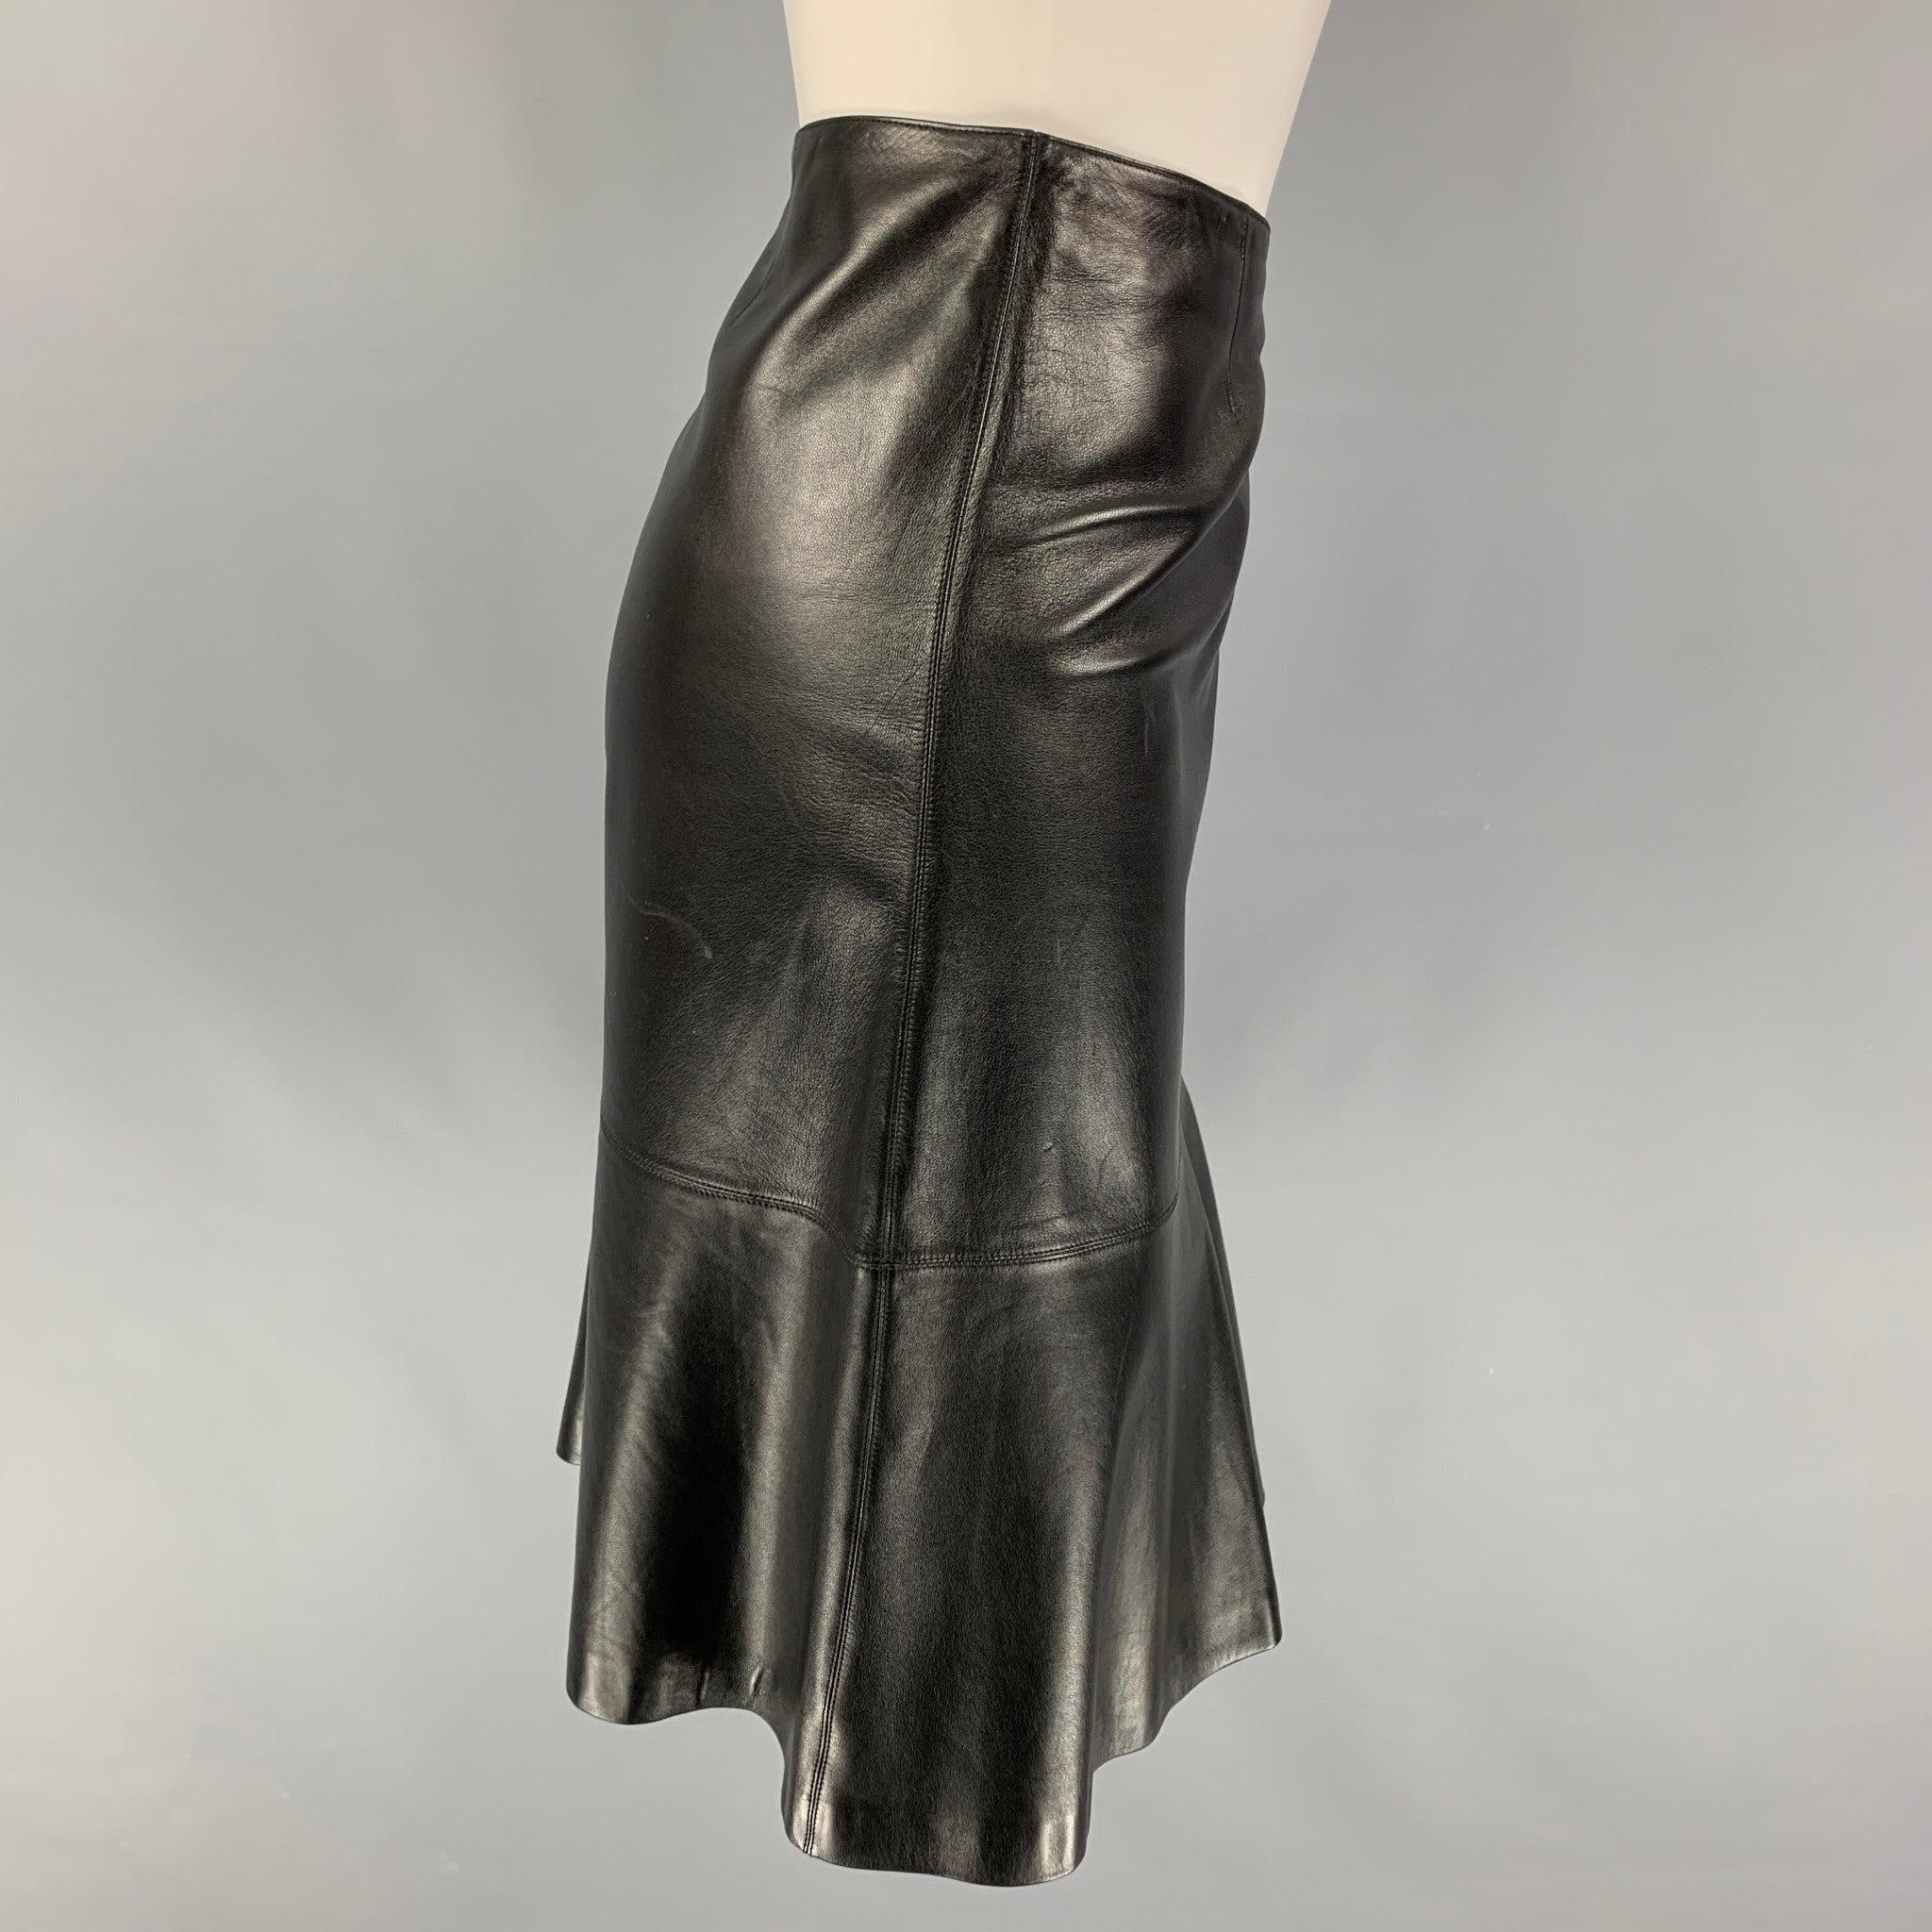 CHANEL skirt comes in a black leather featuring a trumpet style, logo emblem, and a back zip up closure. Made in France.
Very Good
Pre-Owned Condition. 

Marked:   94305 04A / 38 

Measurements: 
  Waist: 29 inches  Hip: 37 inches  Length: 22 inches